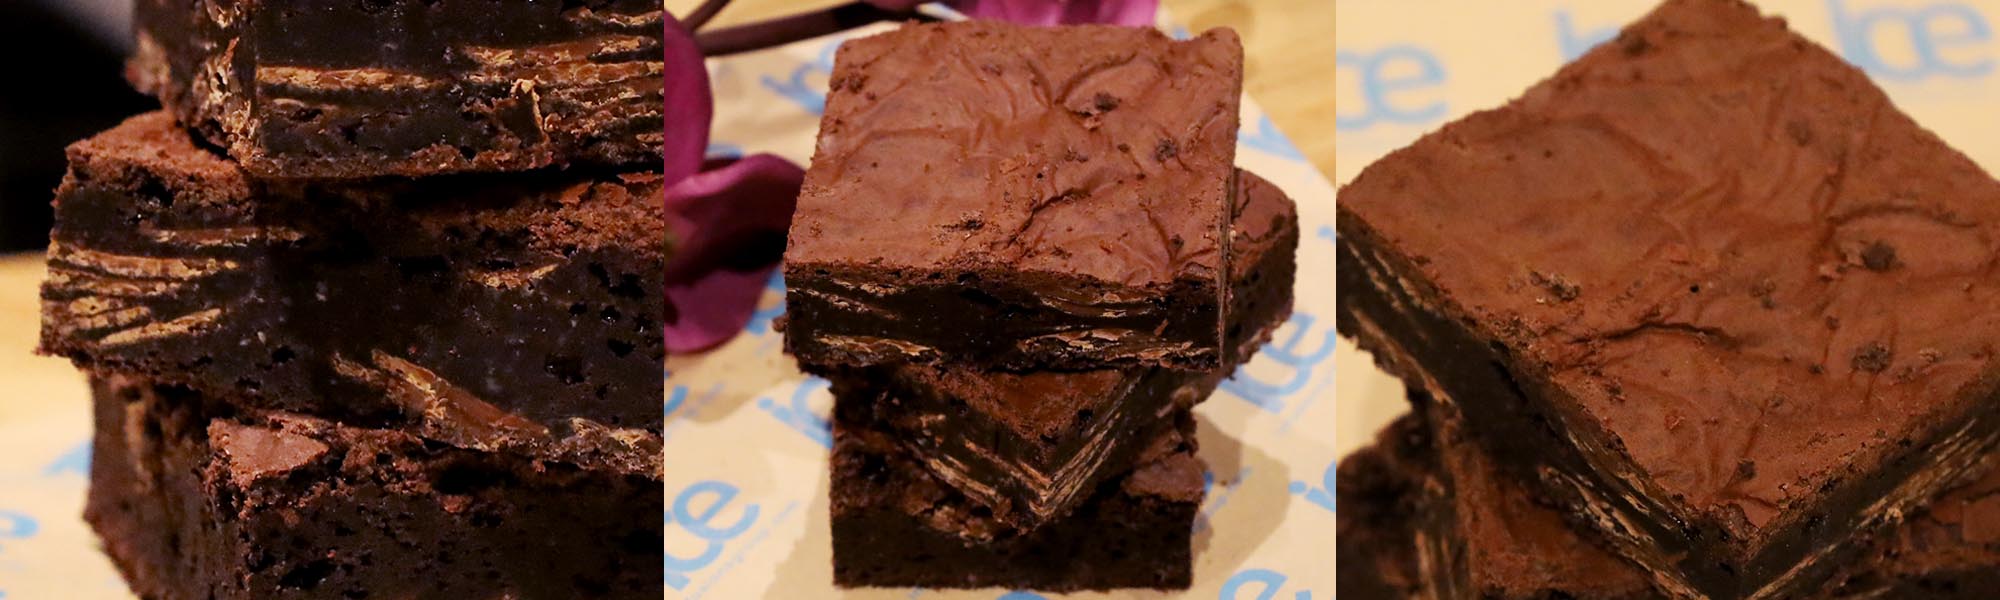 ICE's Famous Gluten Free Brownies for Mother's Day